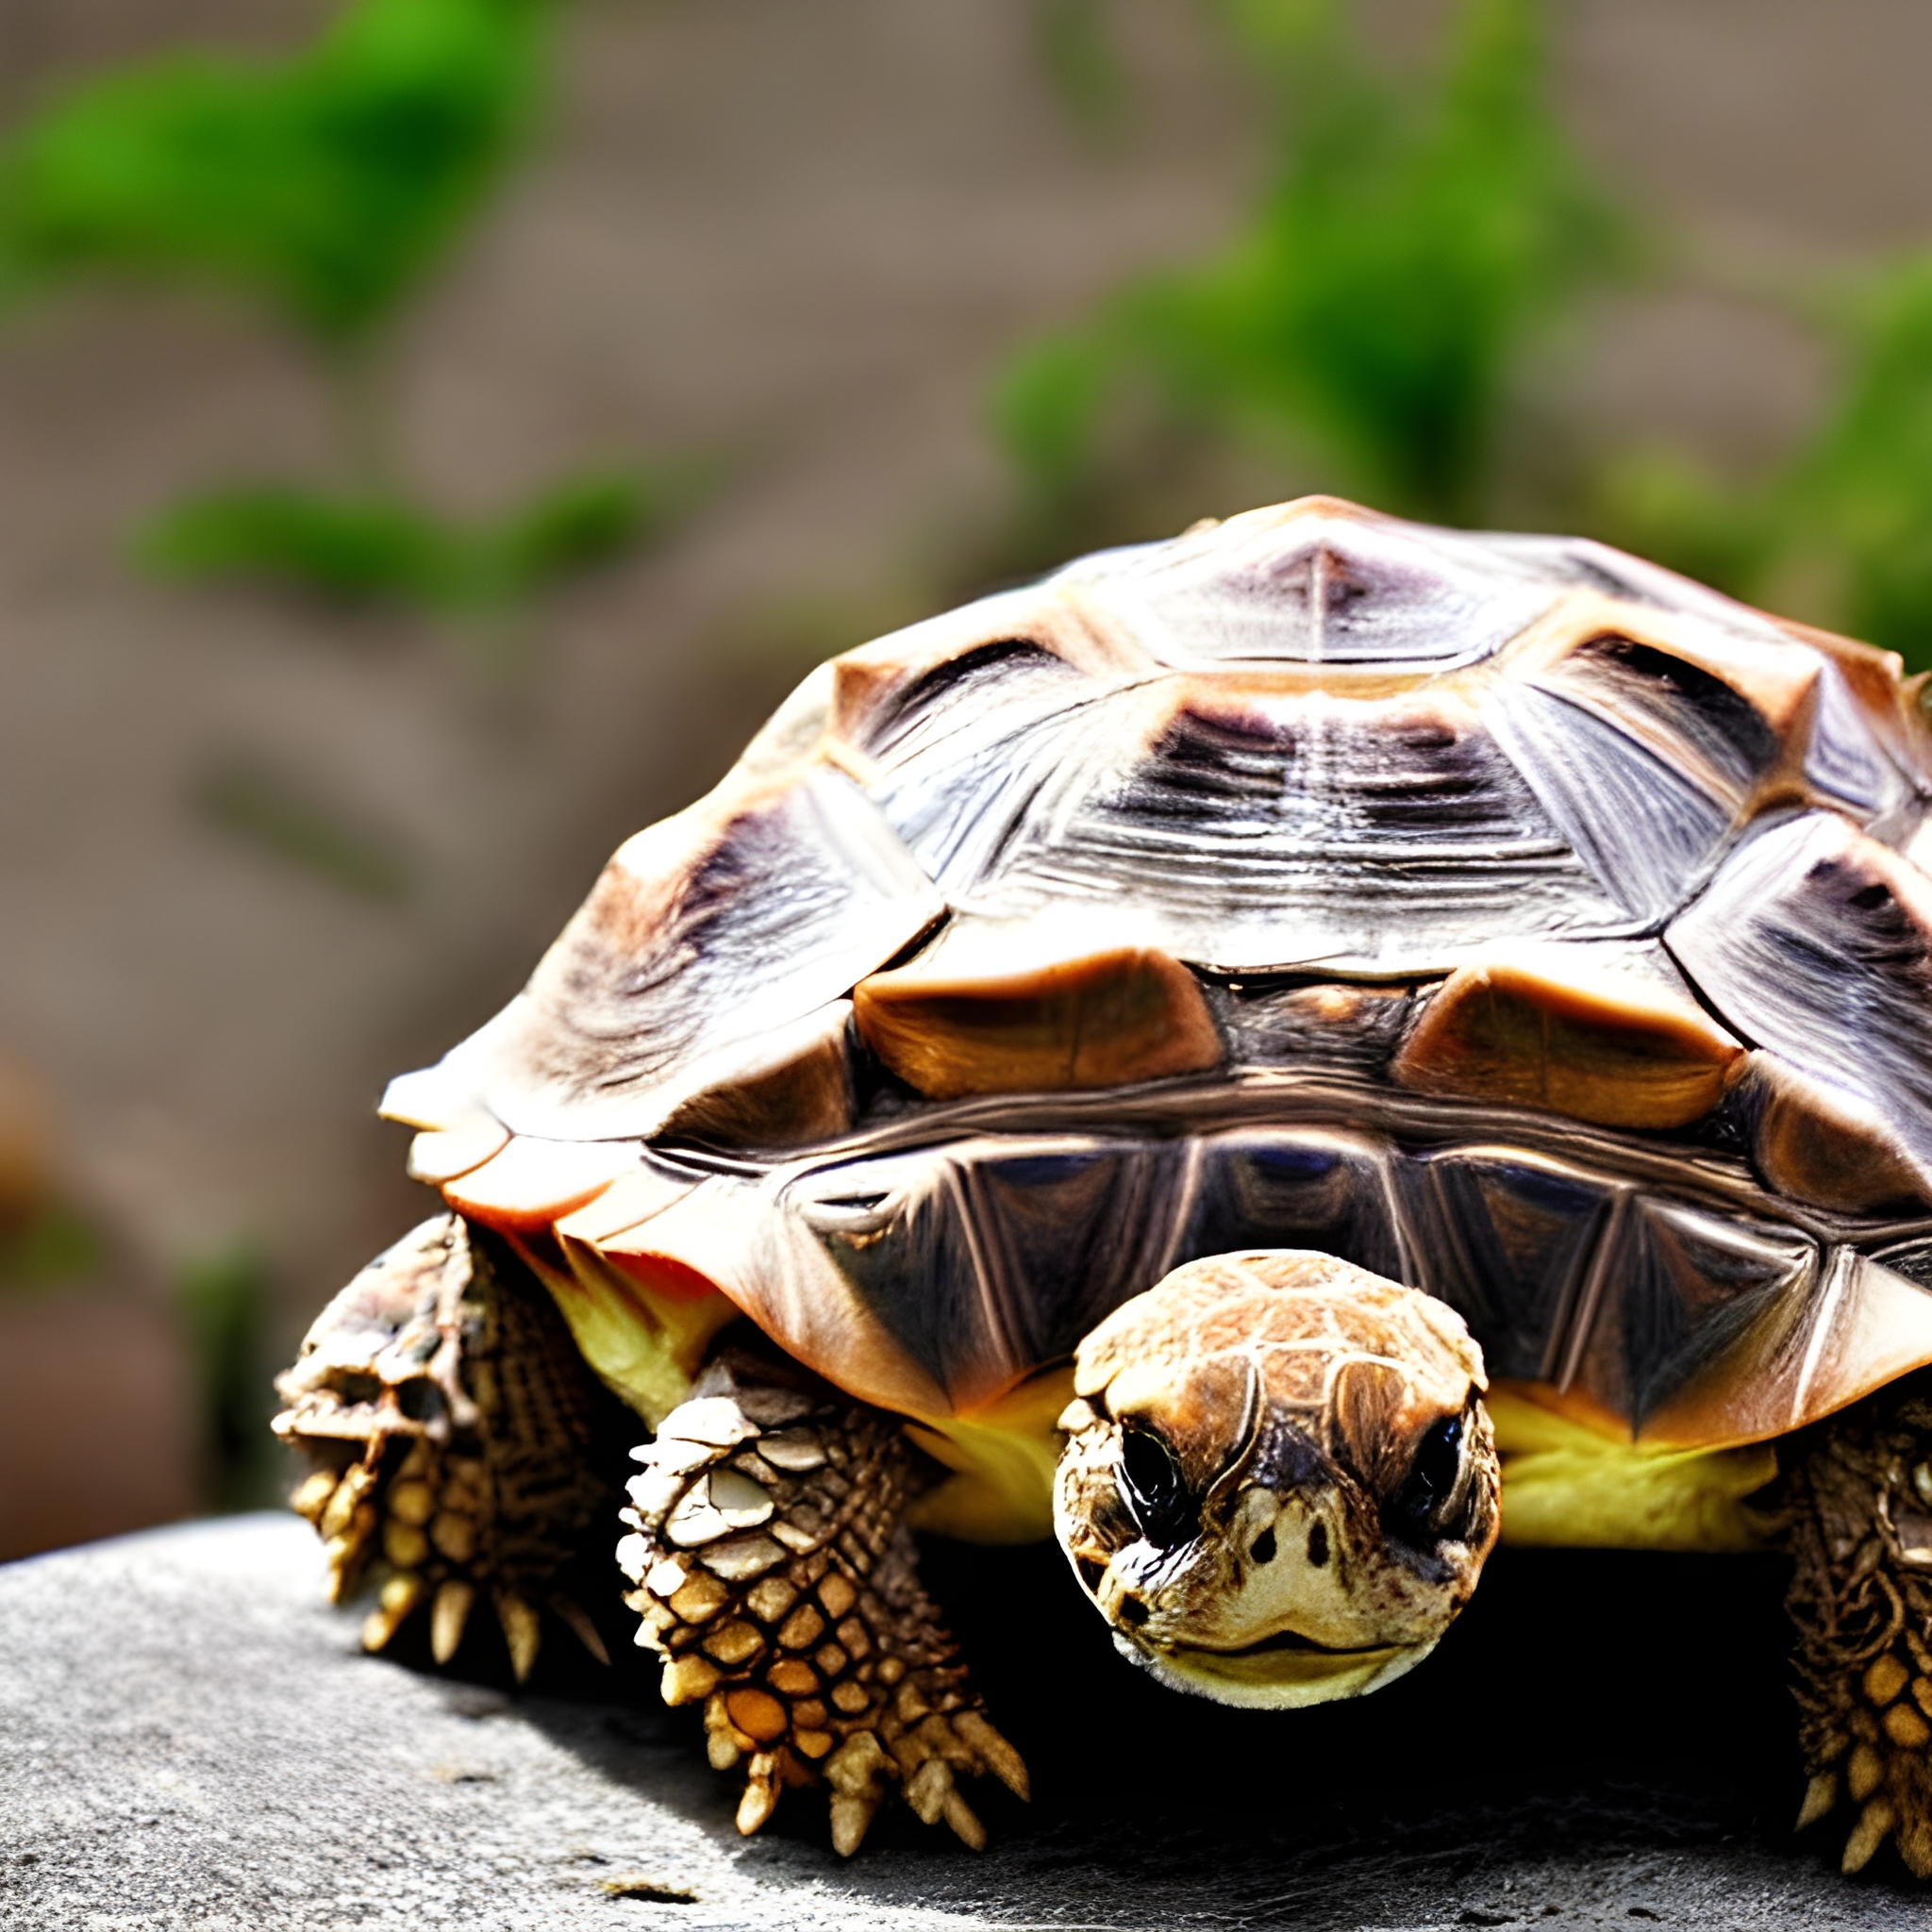 Explore the reproductive behaviors of Russian tortoises, including courtship rituals, nesting, and egg-laying.